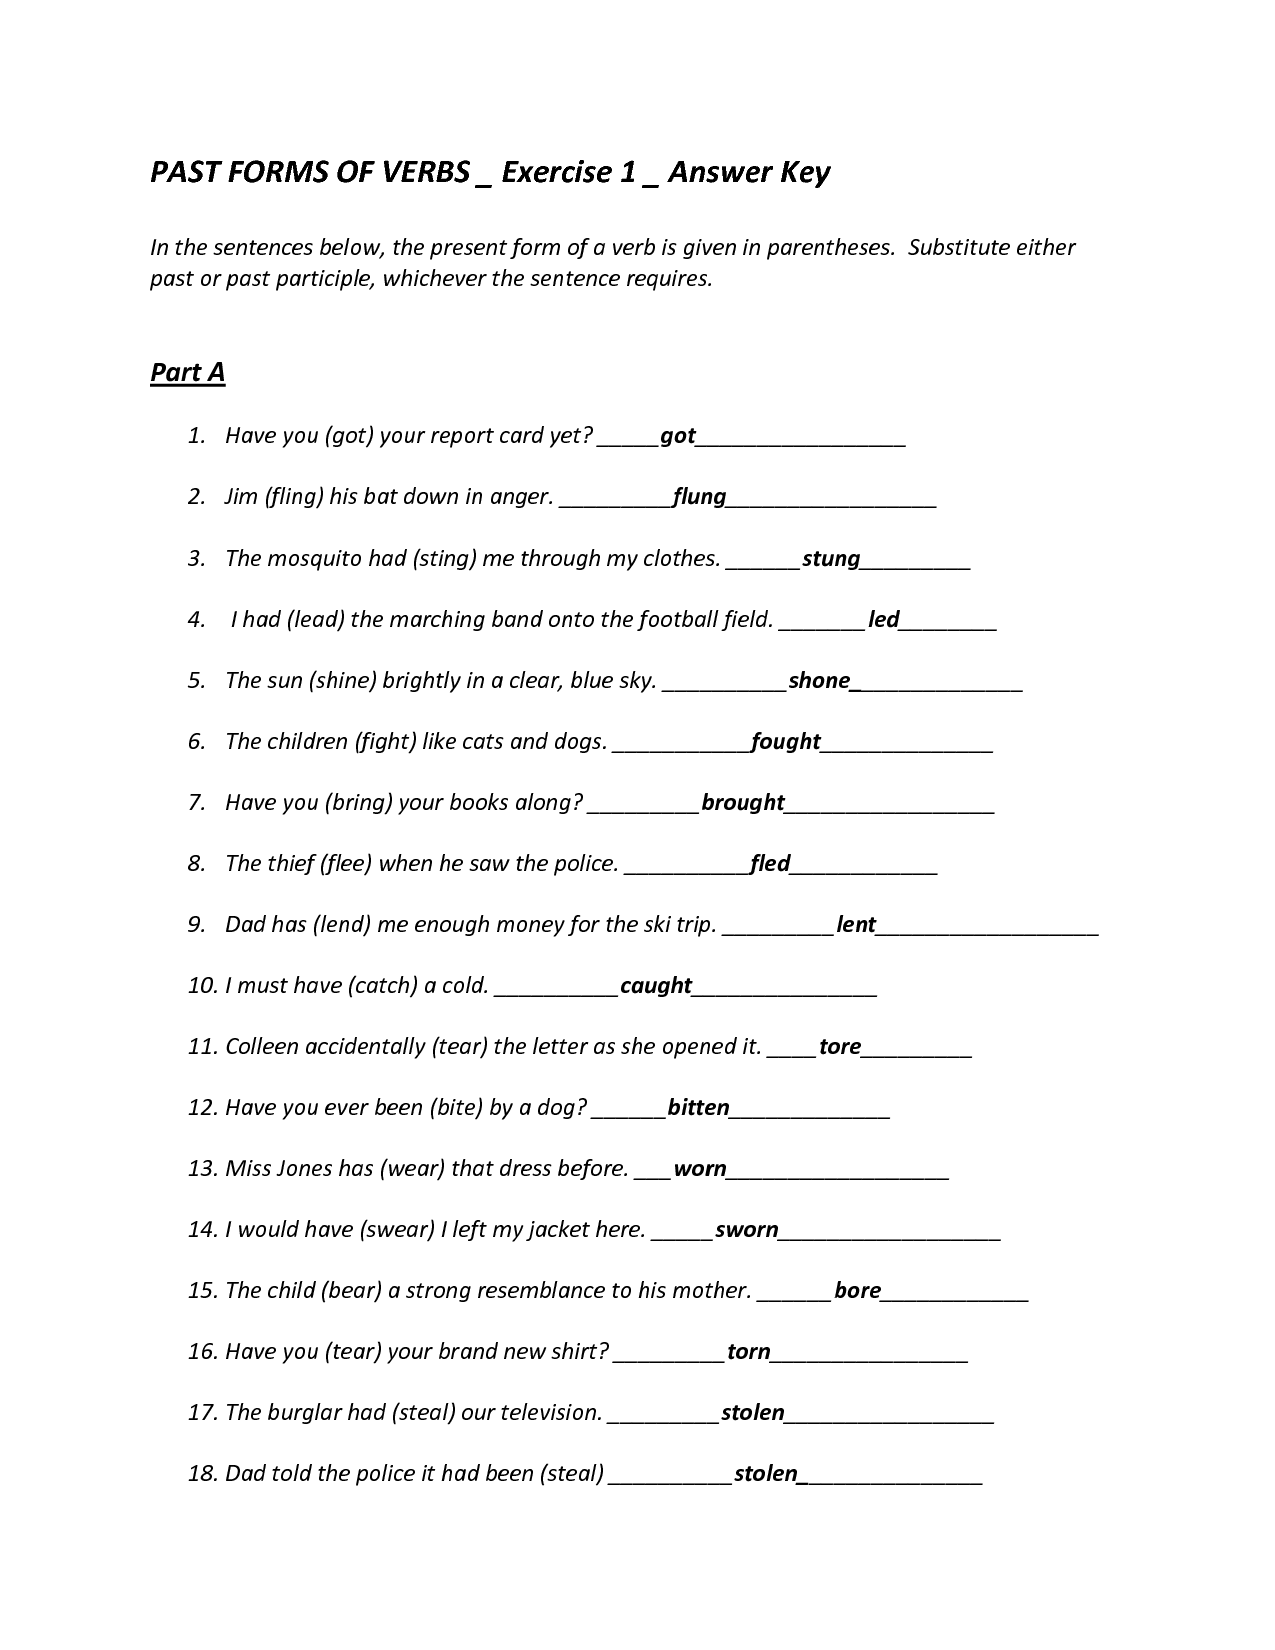 12-best-images-of-future-perfect-tense-worksheet-future-tense-worksheets-present-tense-ar